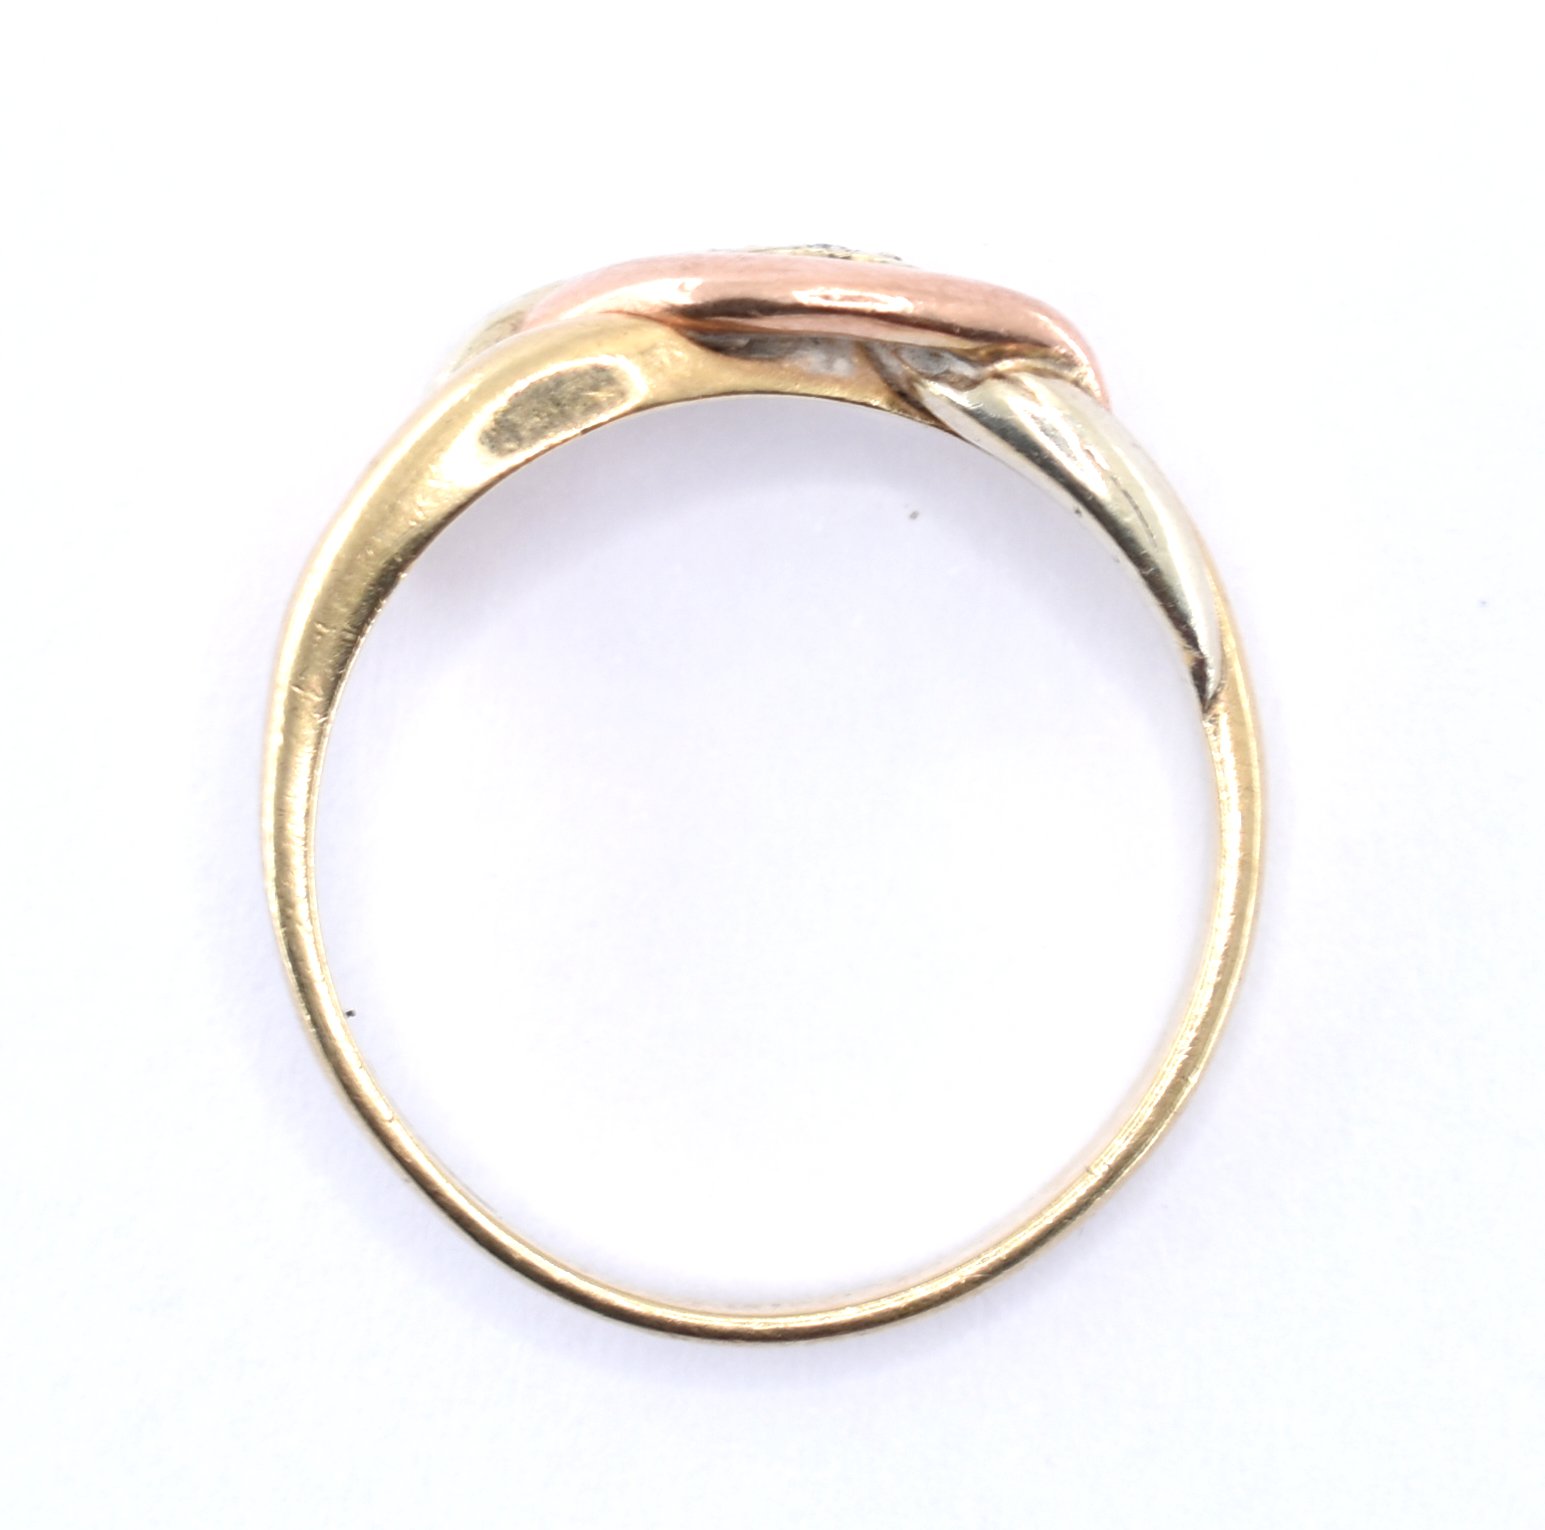 9CT TRI GOLD AND DIAMOND RING - Image 6 of 6